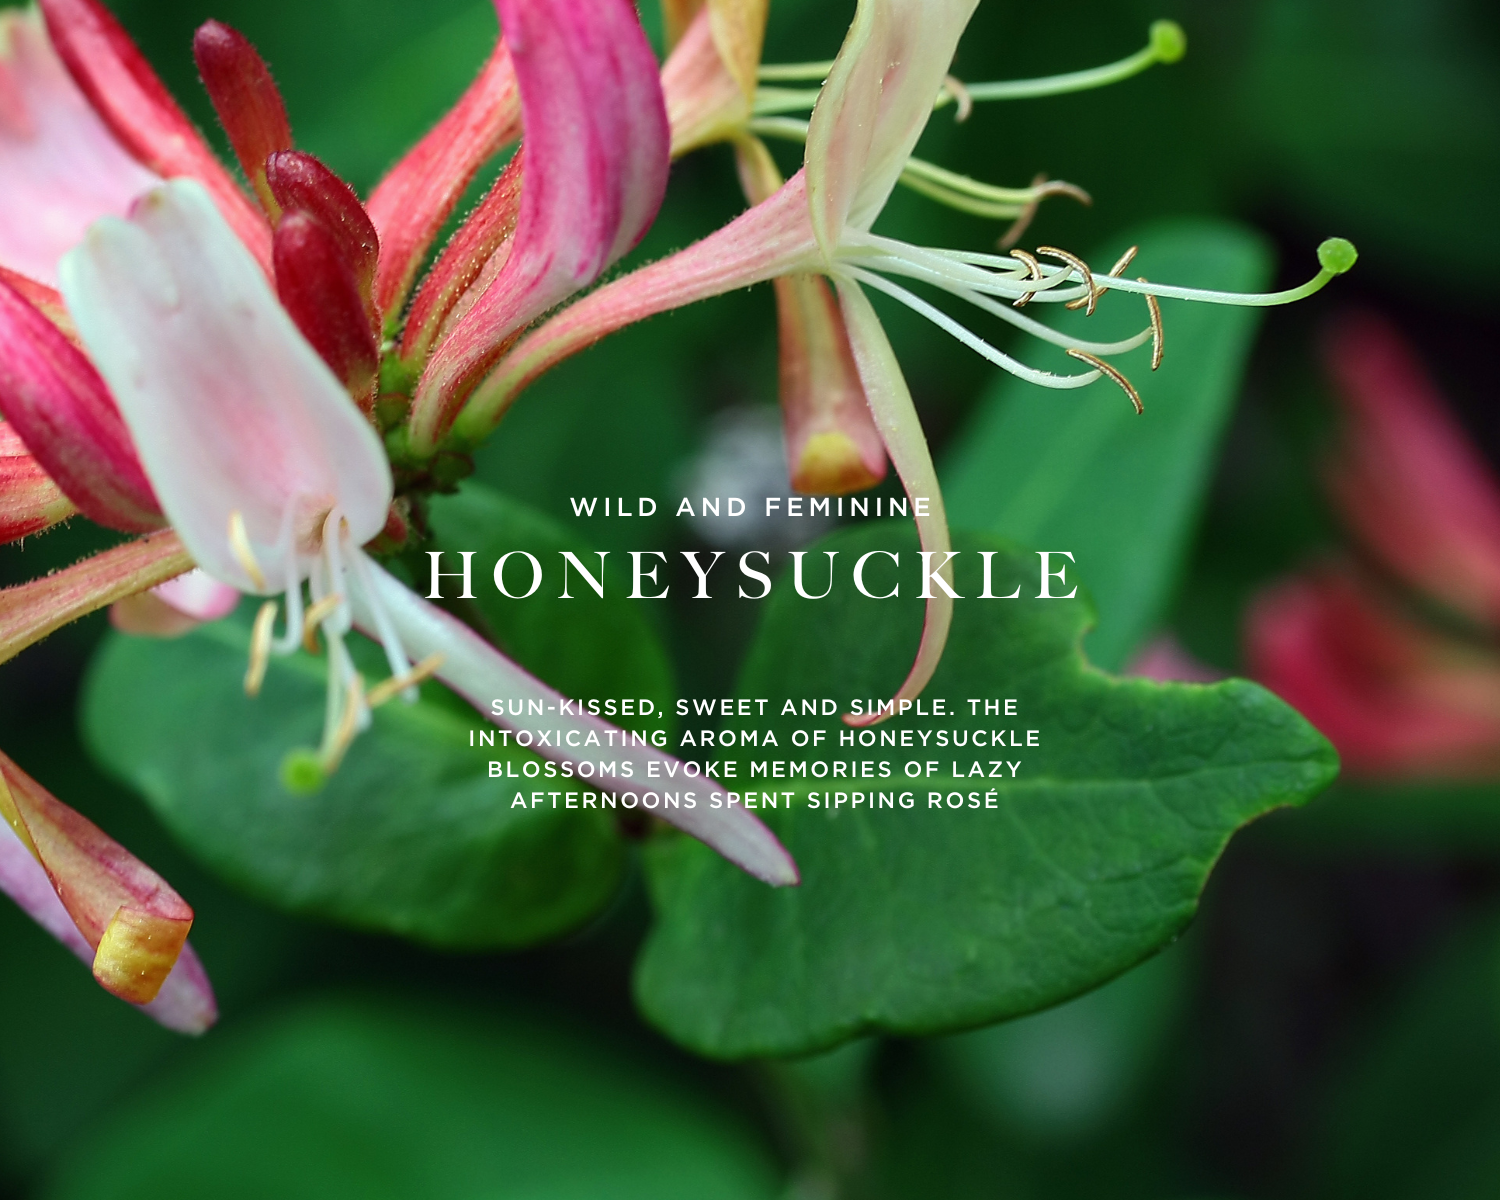 Caswell-Massey Honeysuckle Eau de Toilette for Women: image of honeysuckle flowers to represent primary scent notes